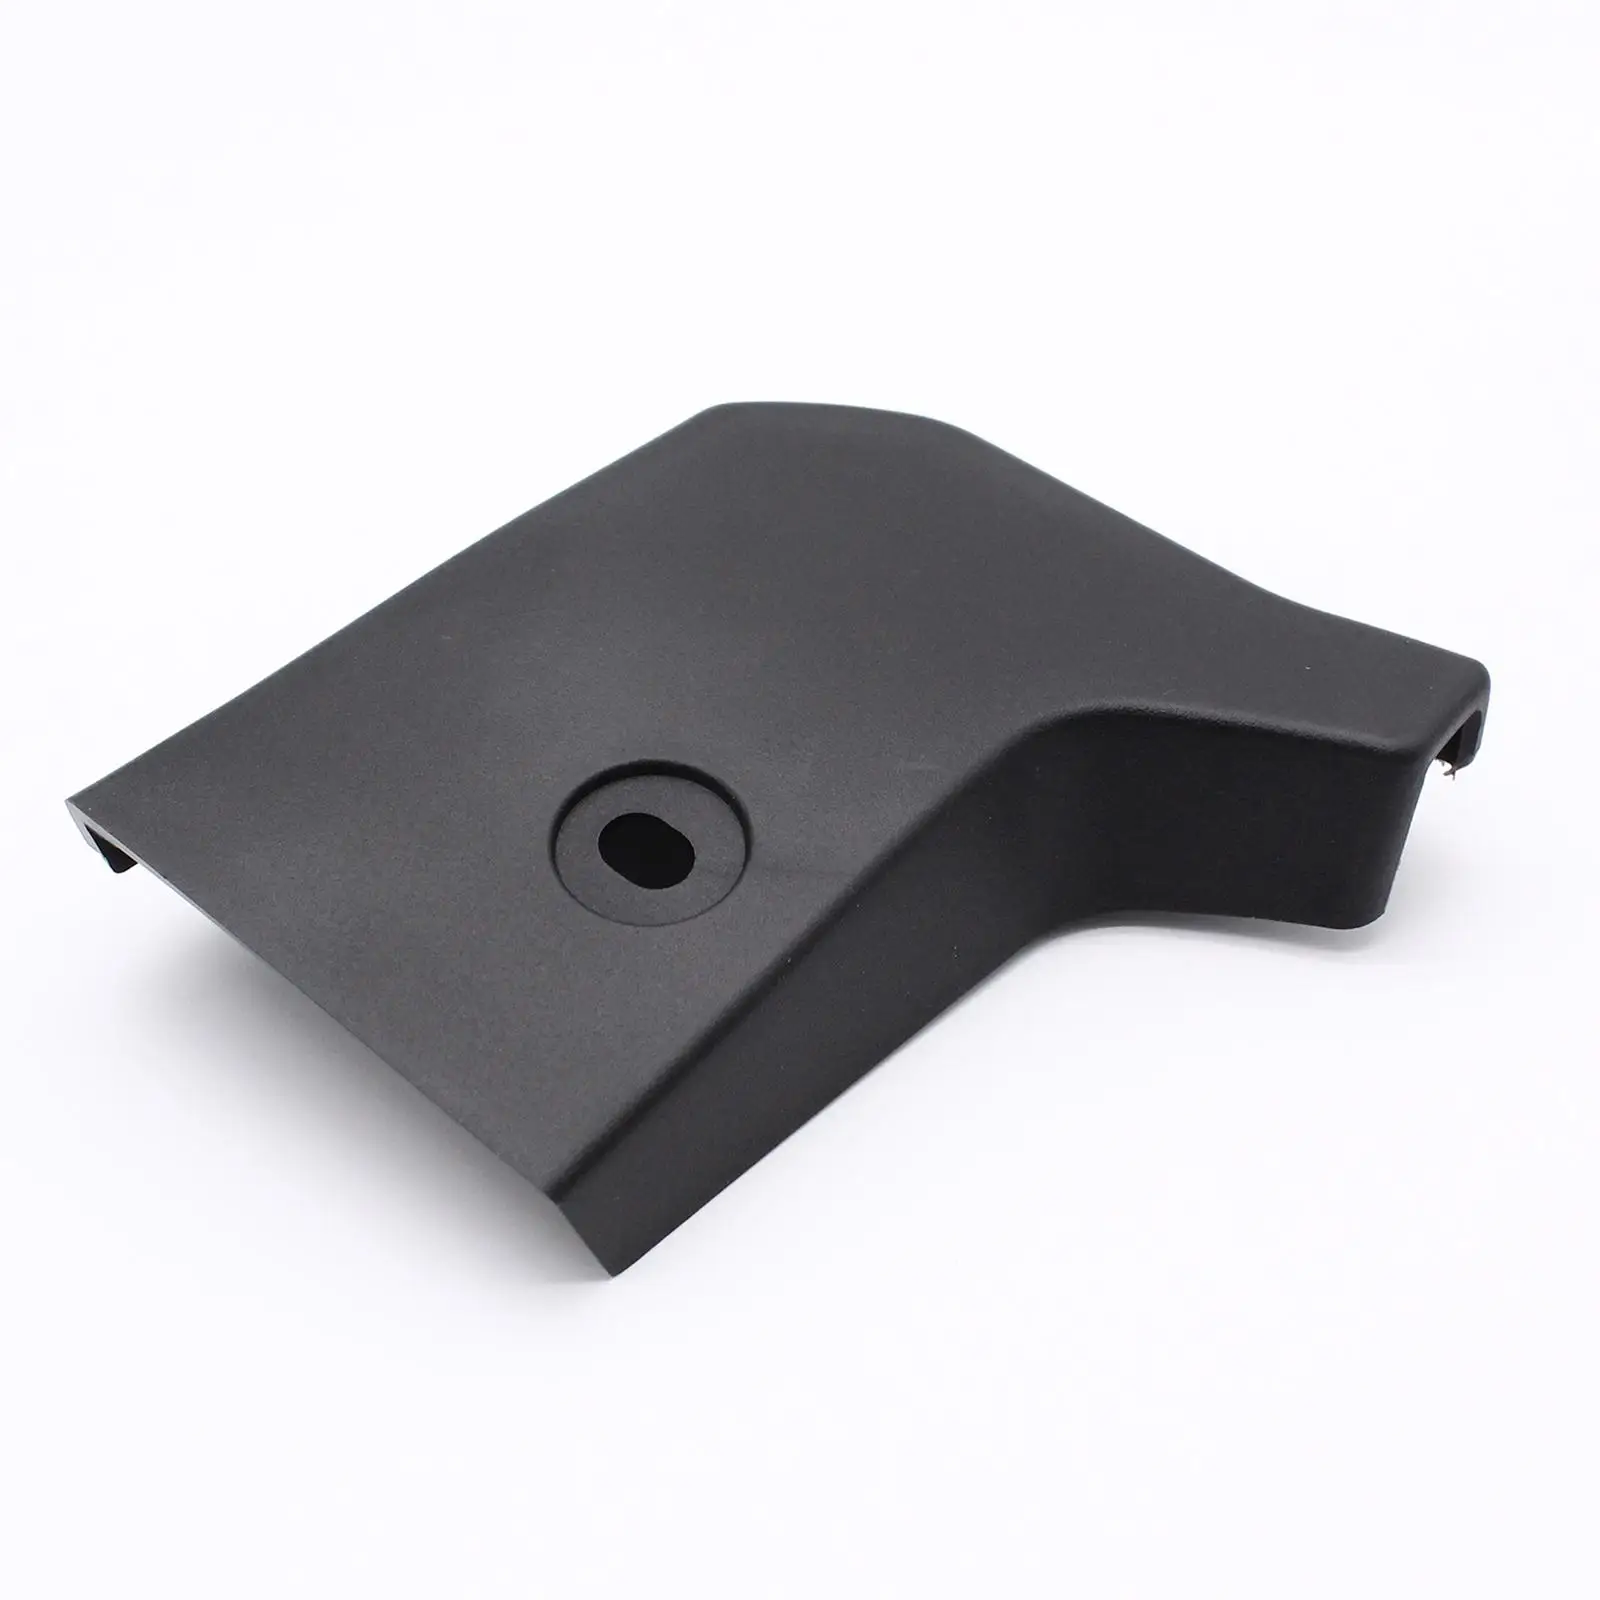  Skirt End Caps , 1771885  for  MK7 O S Premium  Replacement